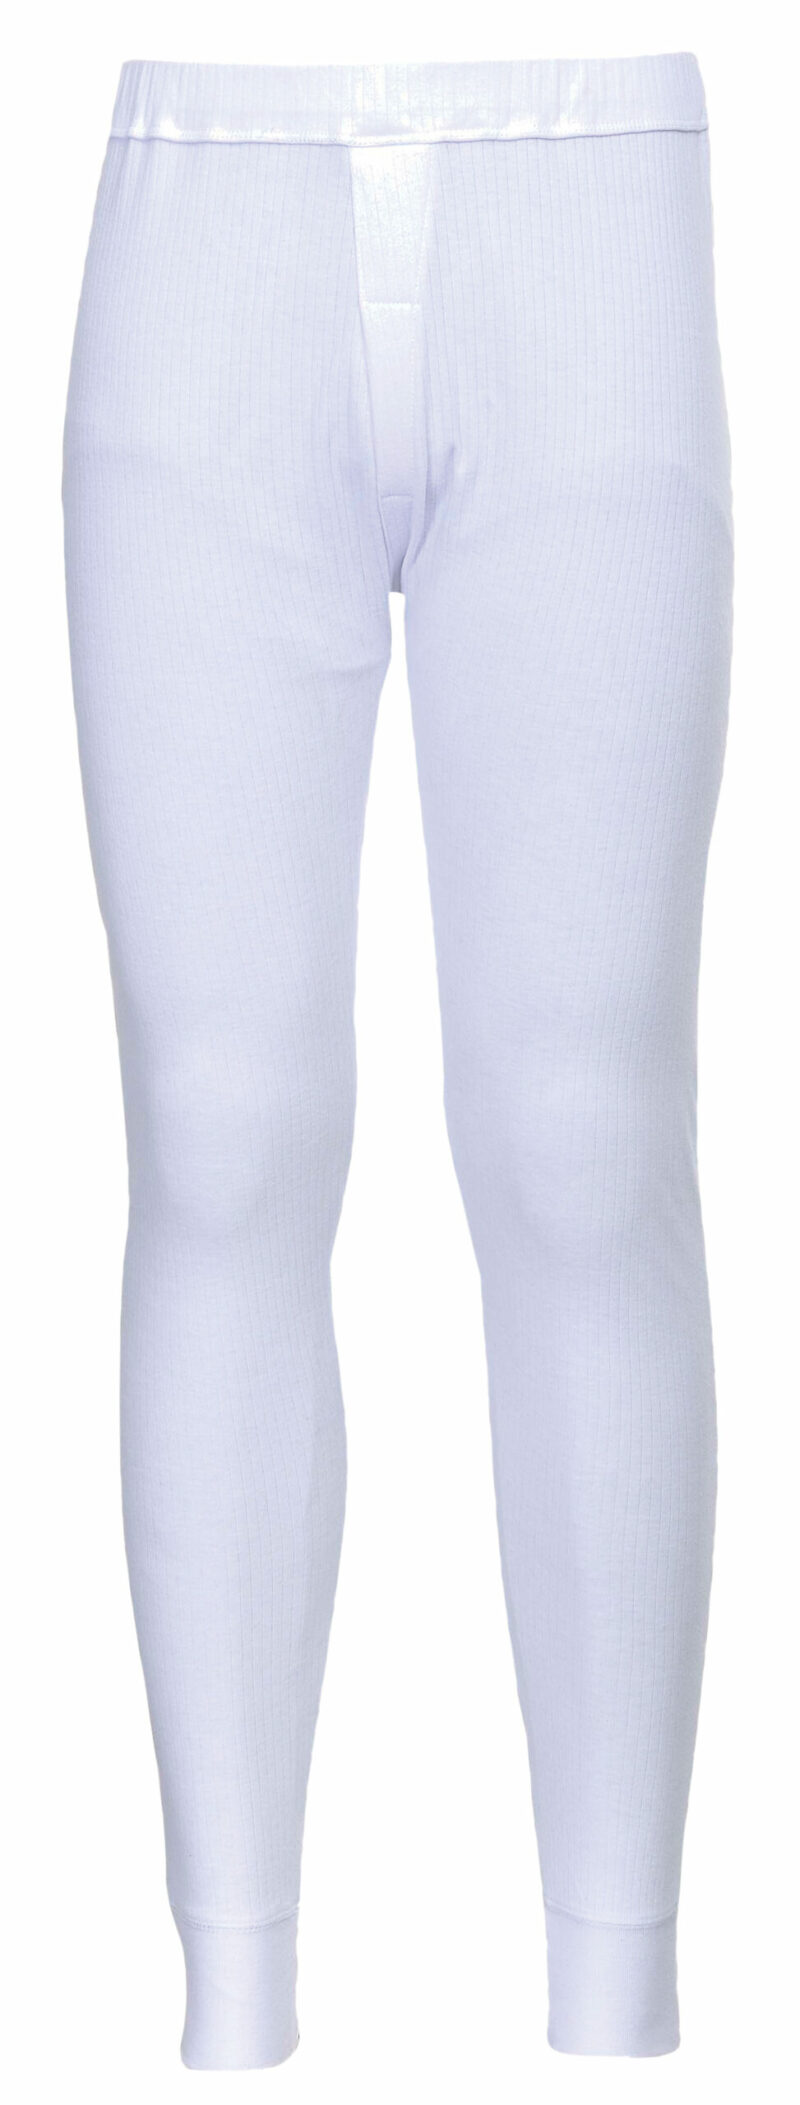 Portwest B121 Thermal Trousers-5947